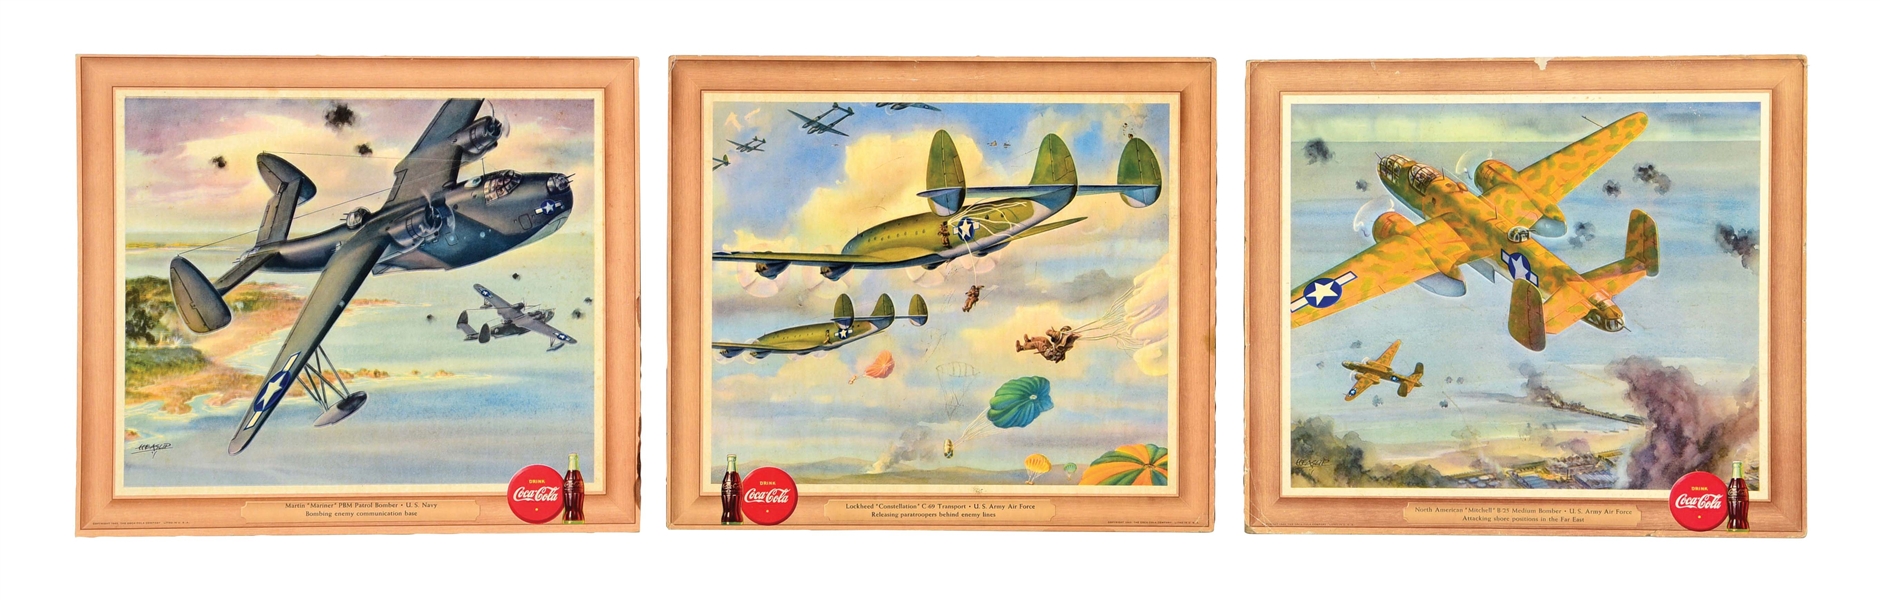 COLLECTION OF 3 DRINK COCA-COLA CARDBOARD LITHOGRAPHS W/ AIRPLANE GRAPHIC.